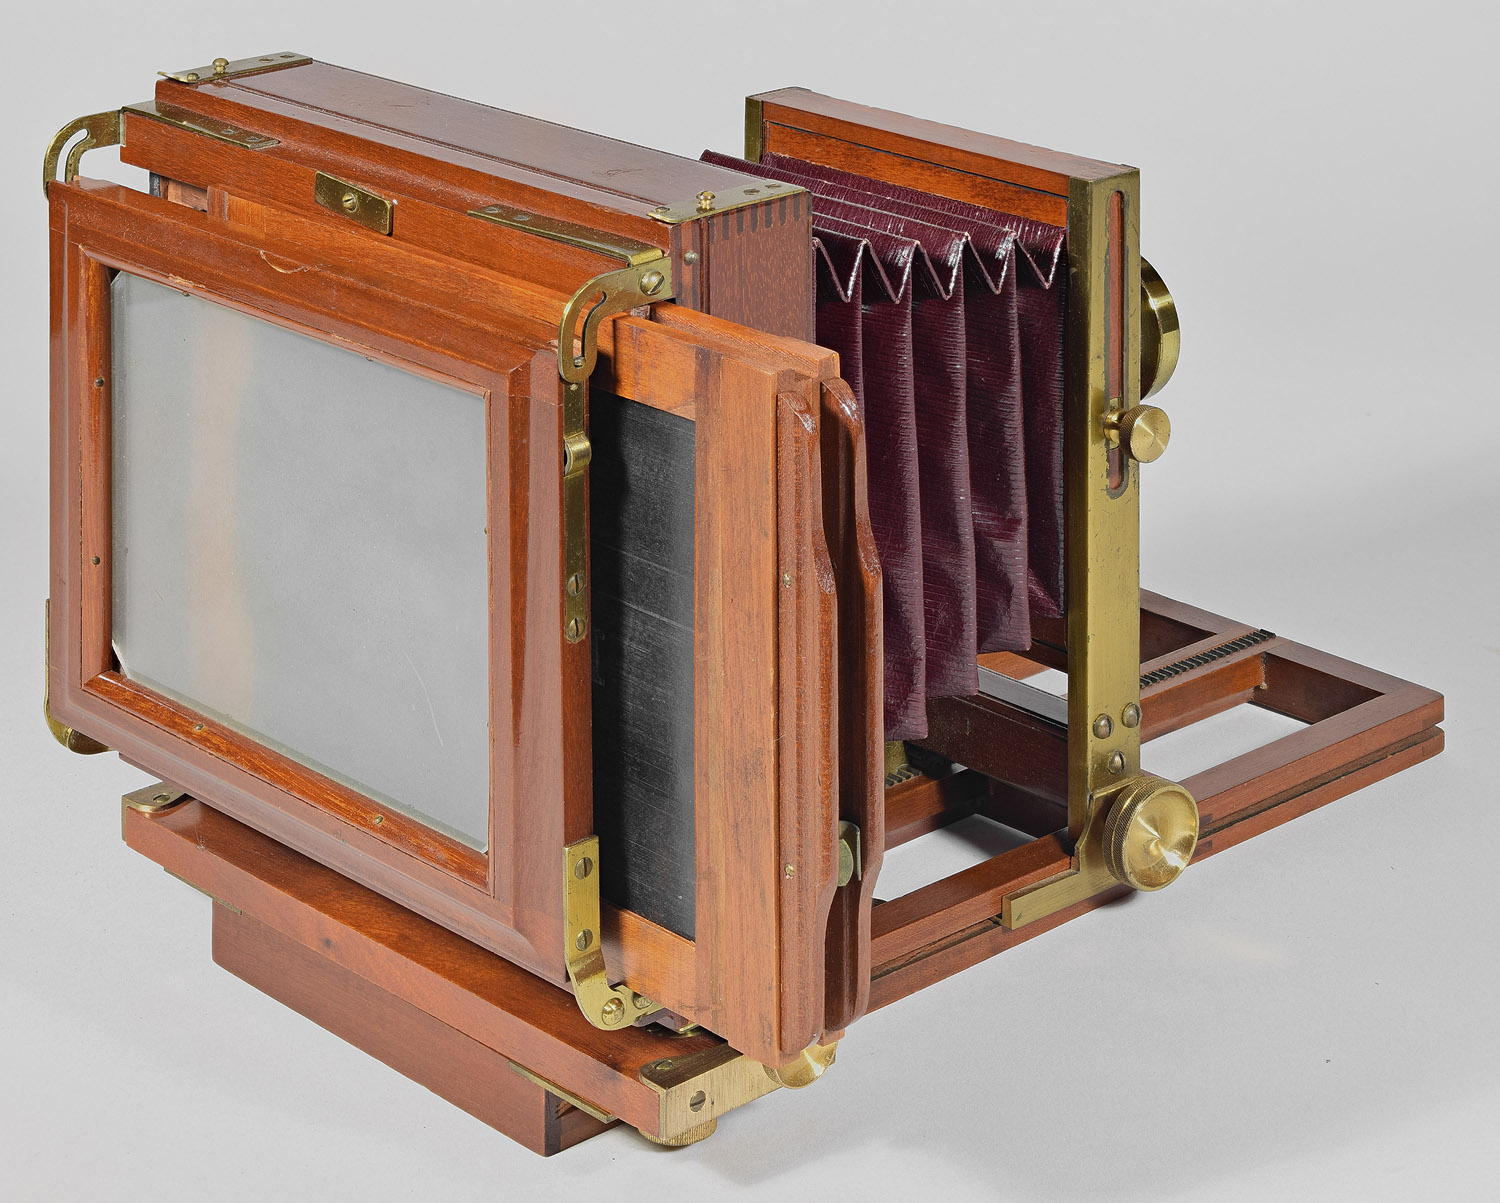 1253.Eastman.Dry.Plate&Film-Interchangable.View.Var.2-4.5x5.5-f-gg.frame.out.with.plate.holder-1500.jpg